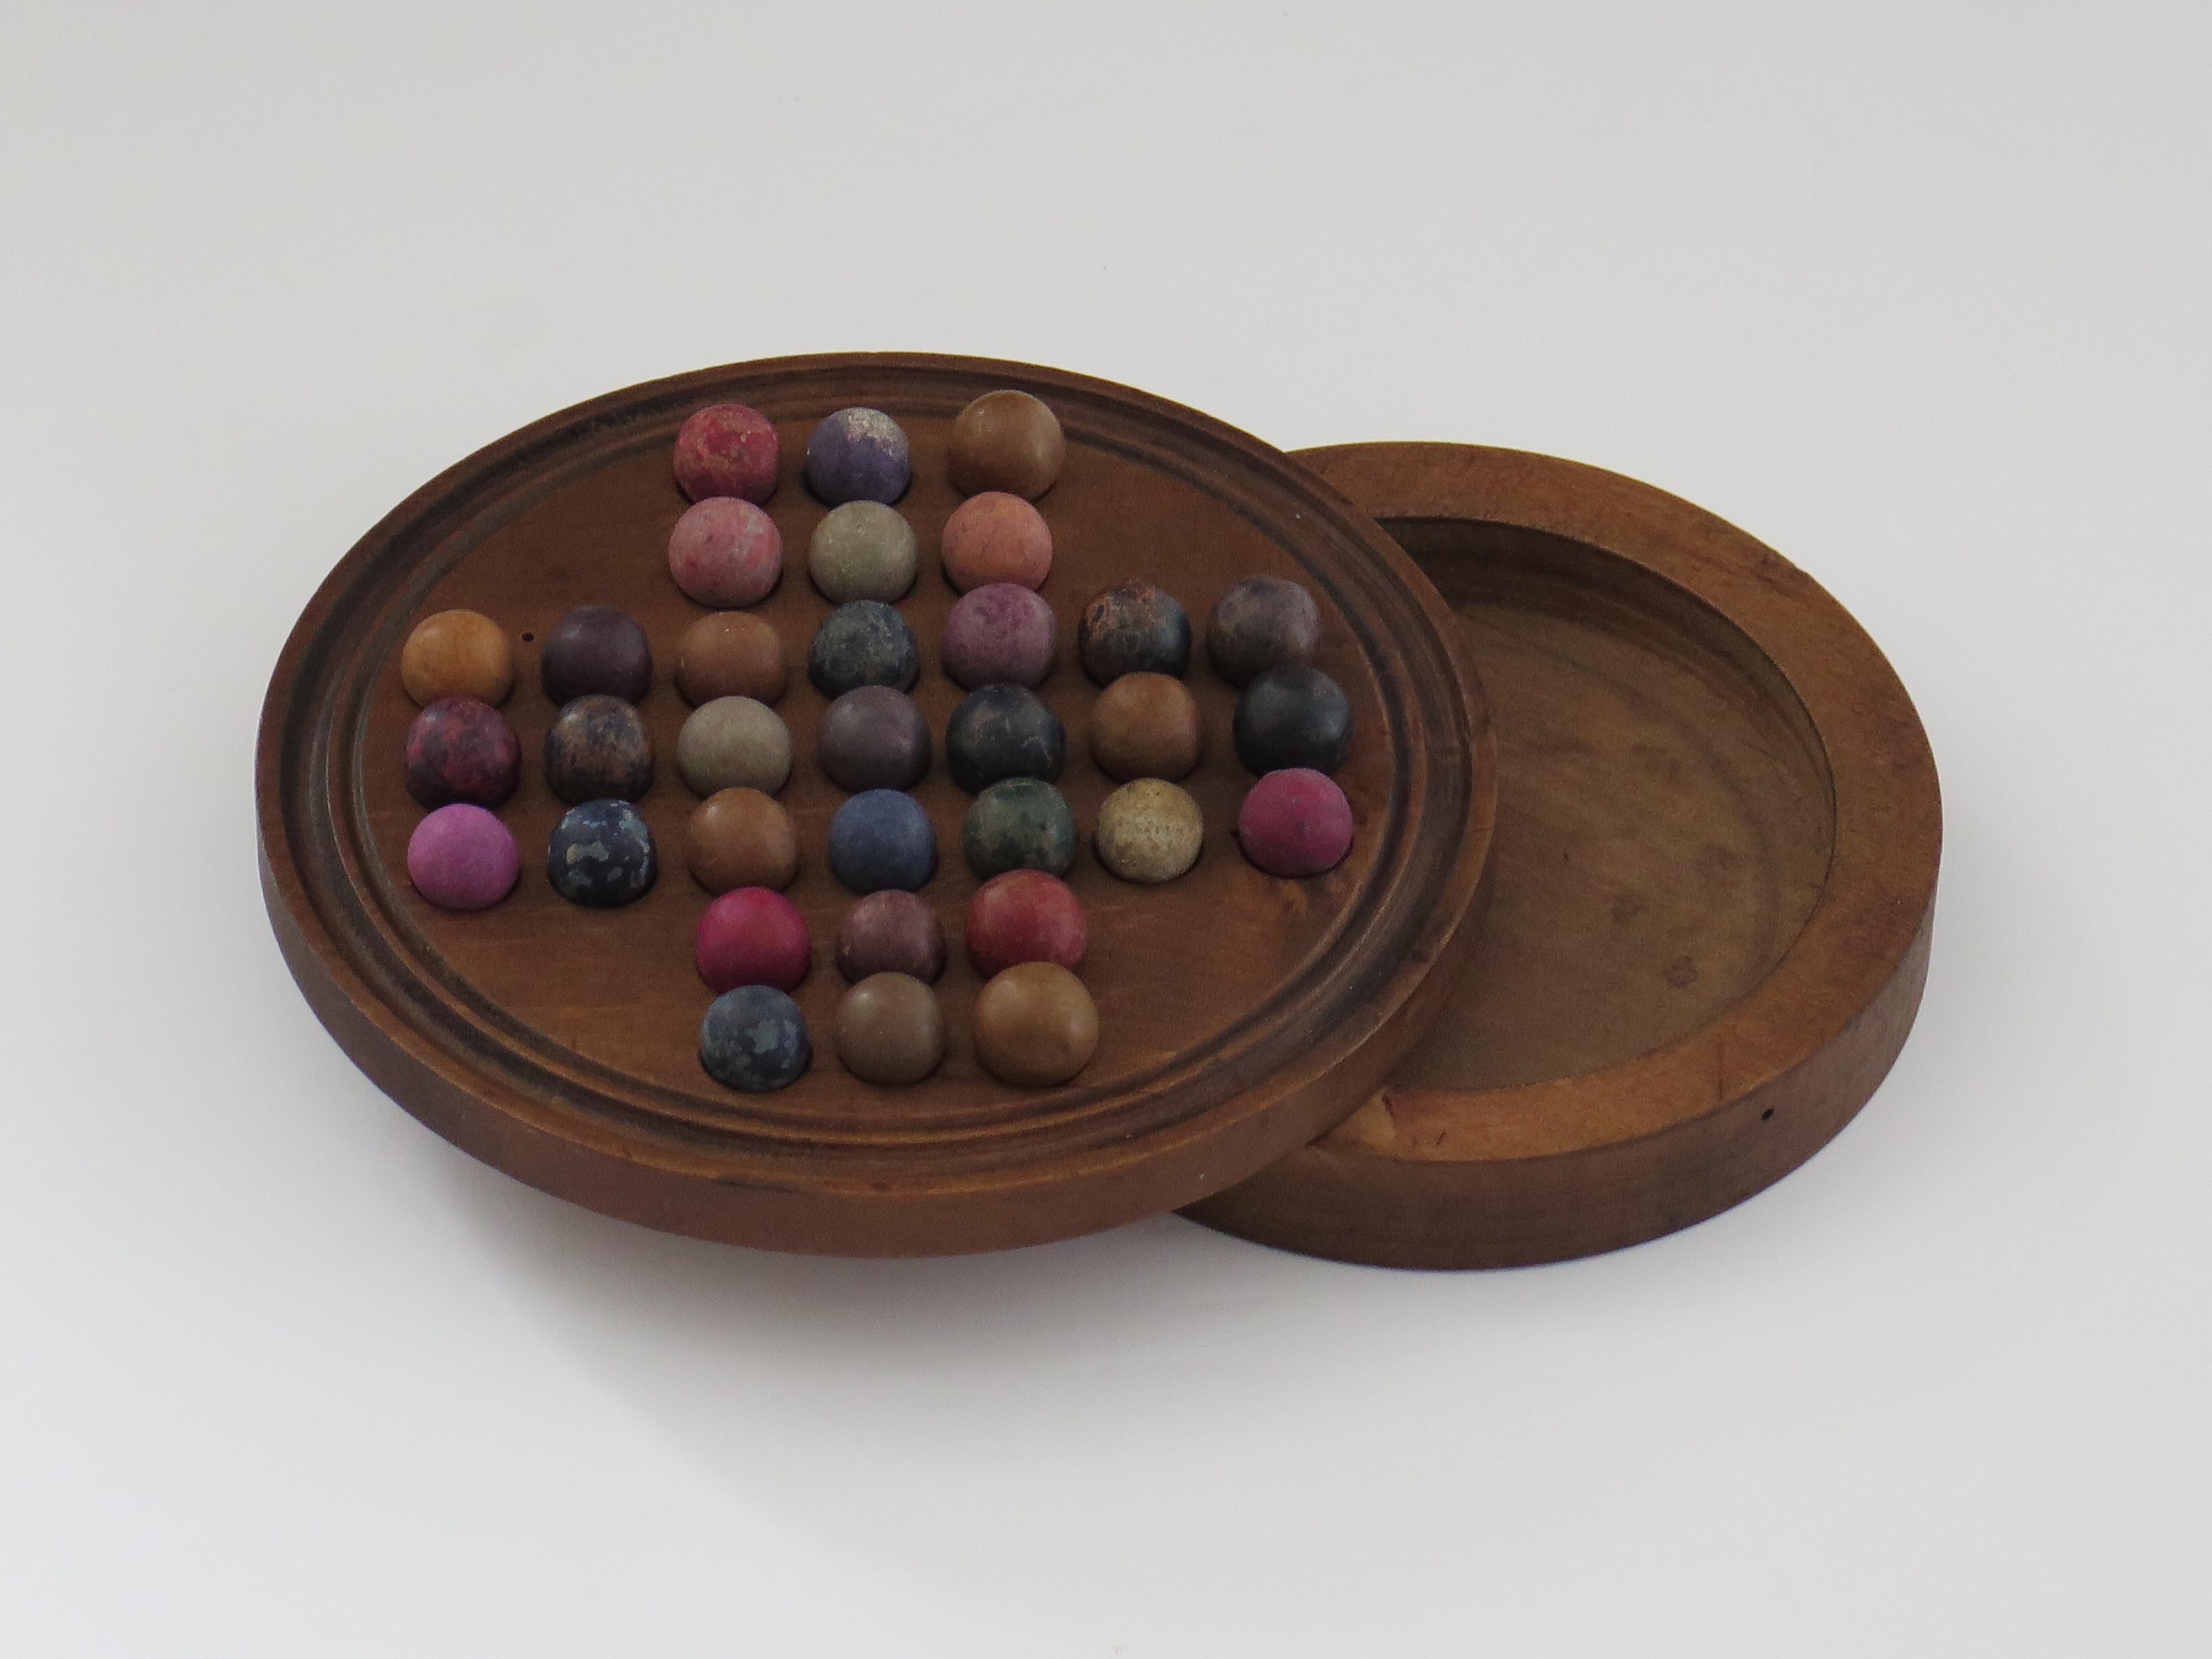 Stone 19th Century Travelling Marble Solitaire Game with 33 Handmade Clay Marbles